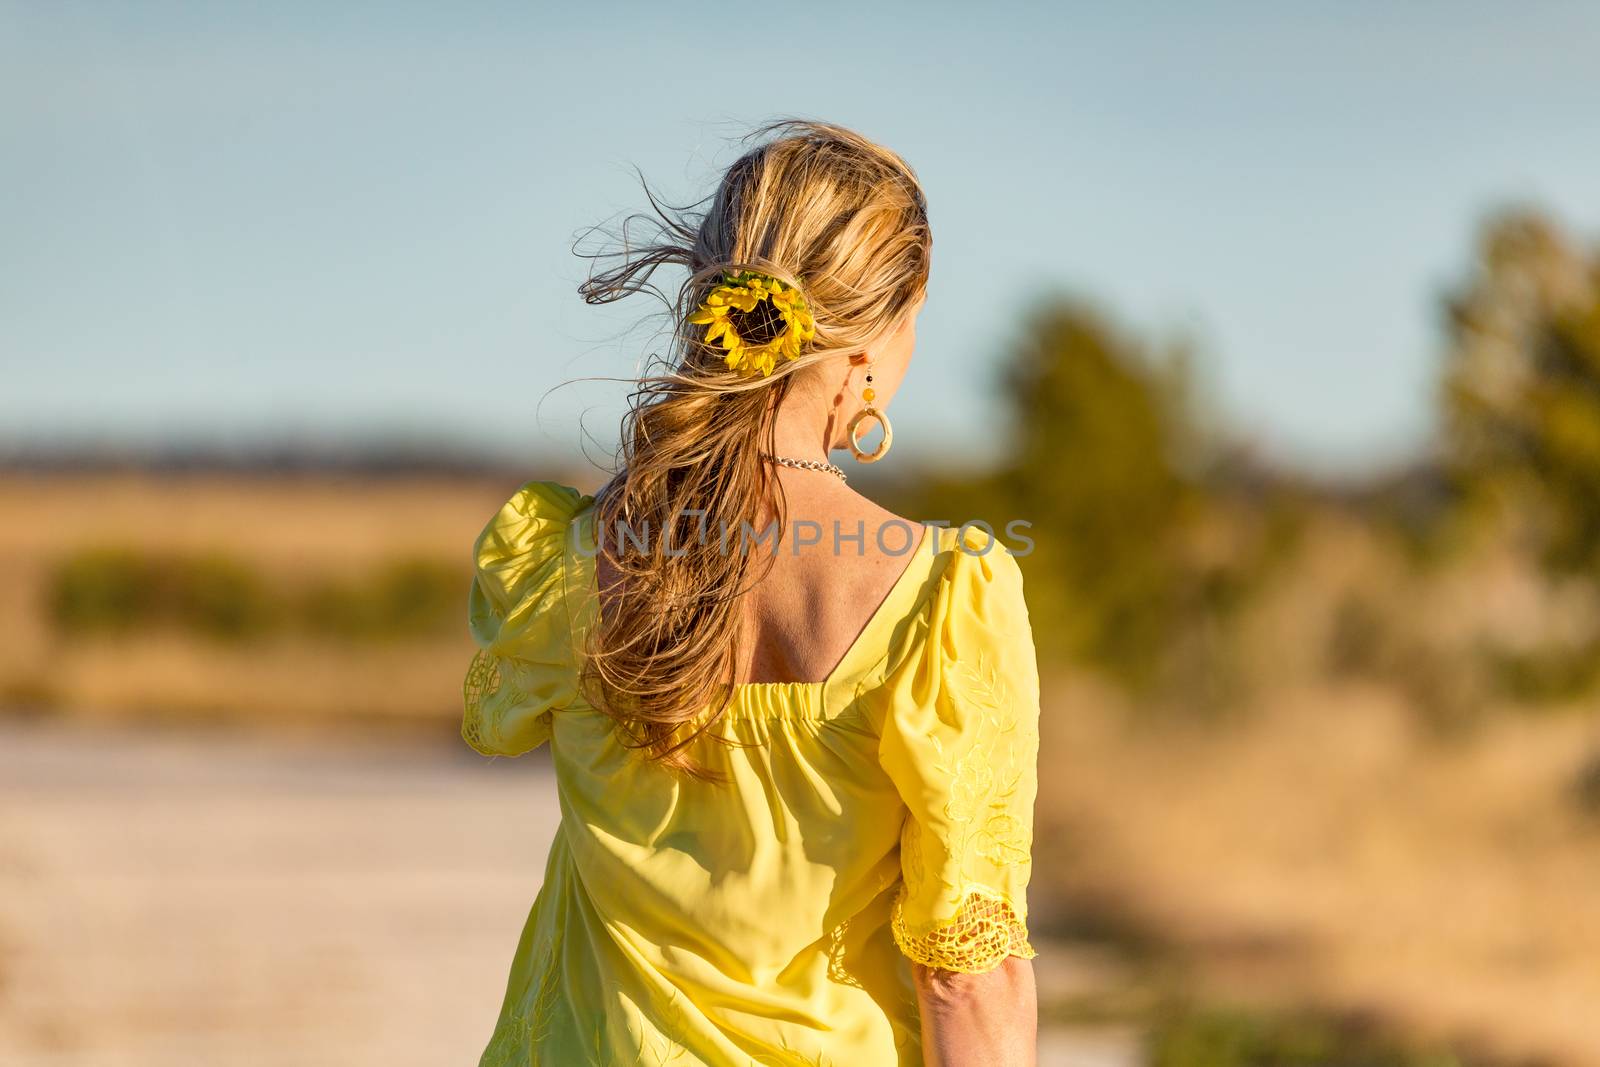 Woman outdoors in beautiful sunshine rural area.  She has a sunflower in her long wavy hair blowing gently in the wind.